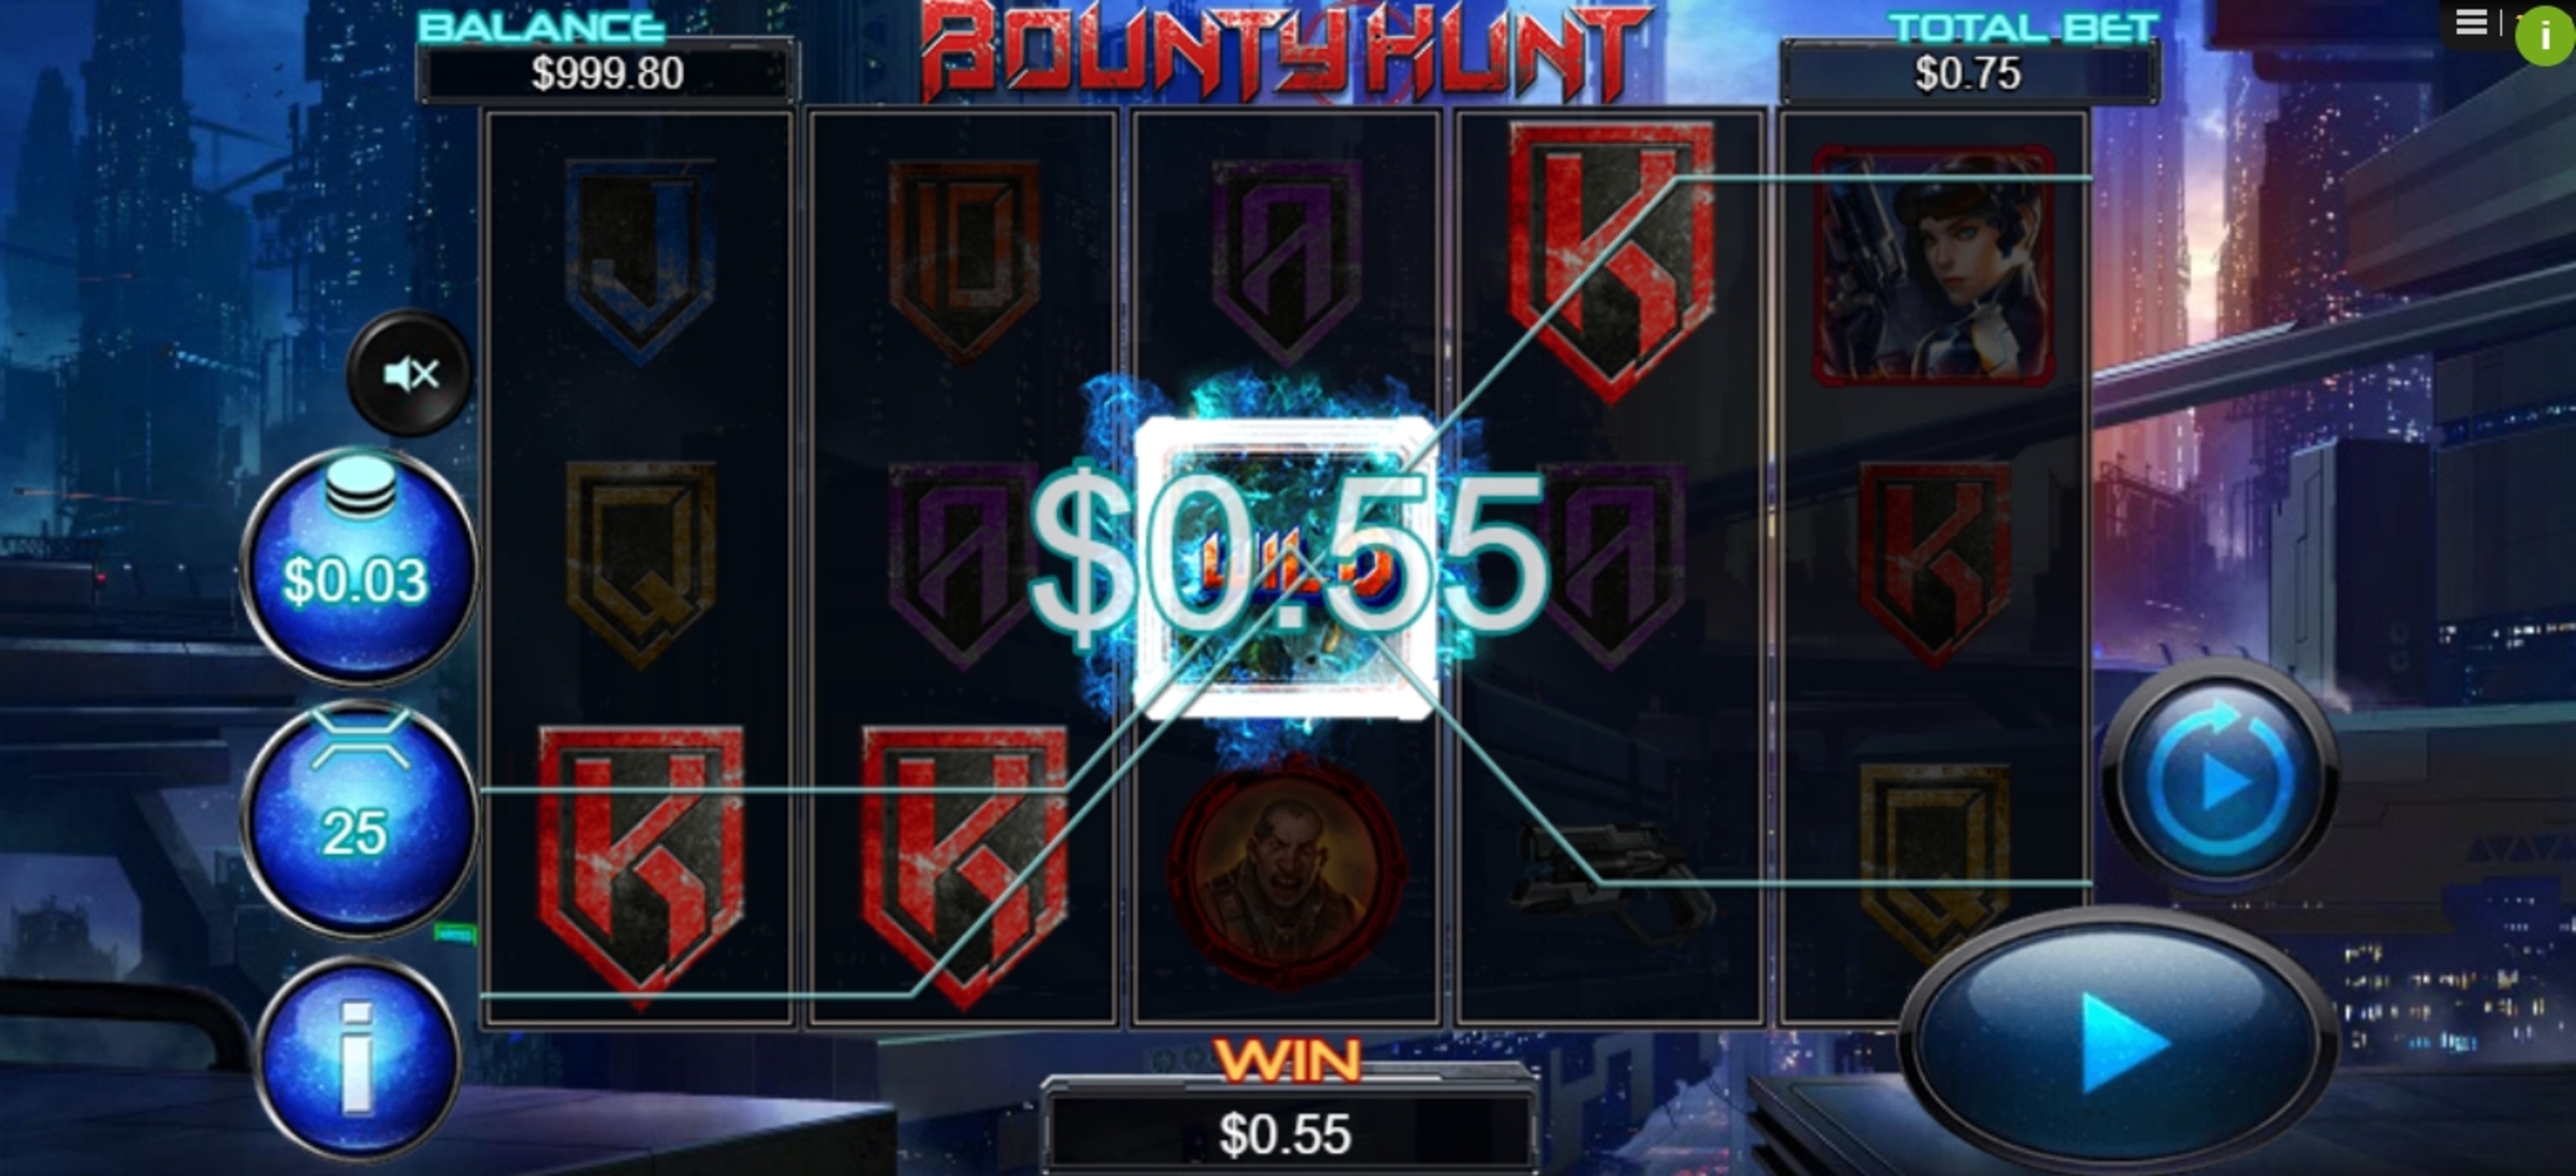 Win Money in Bounty Hunt Free Slot Game by Reel Play